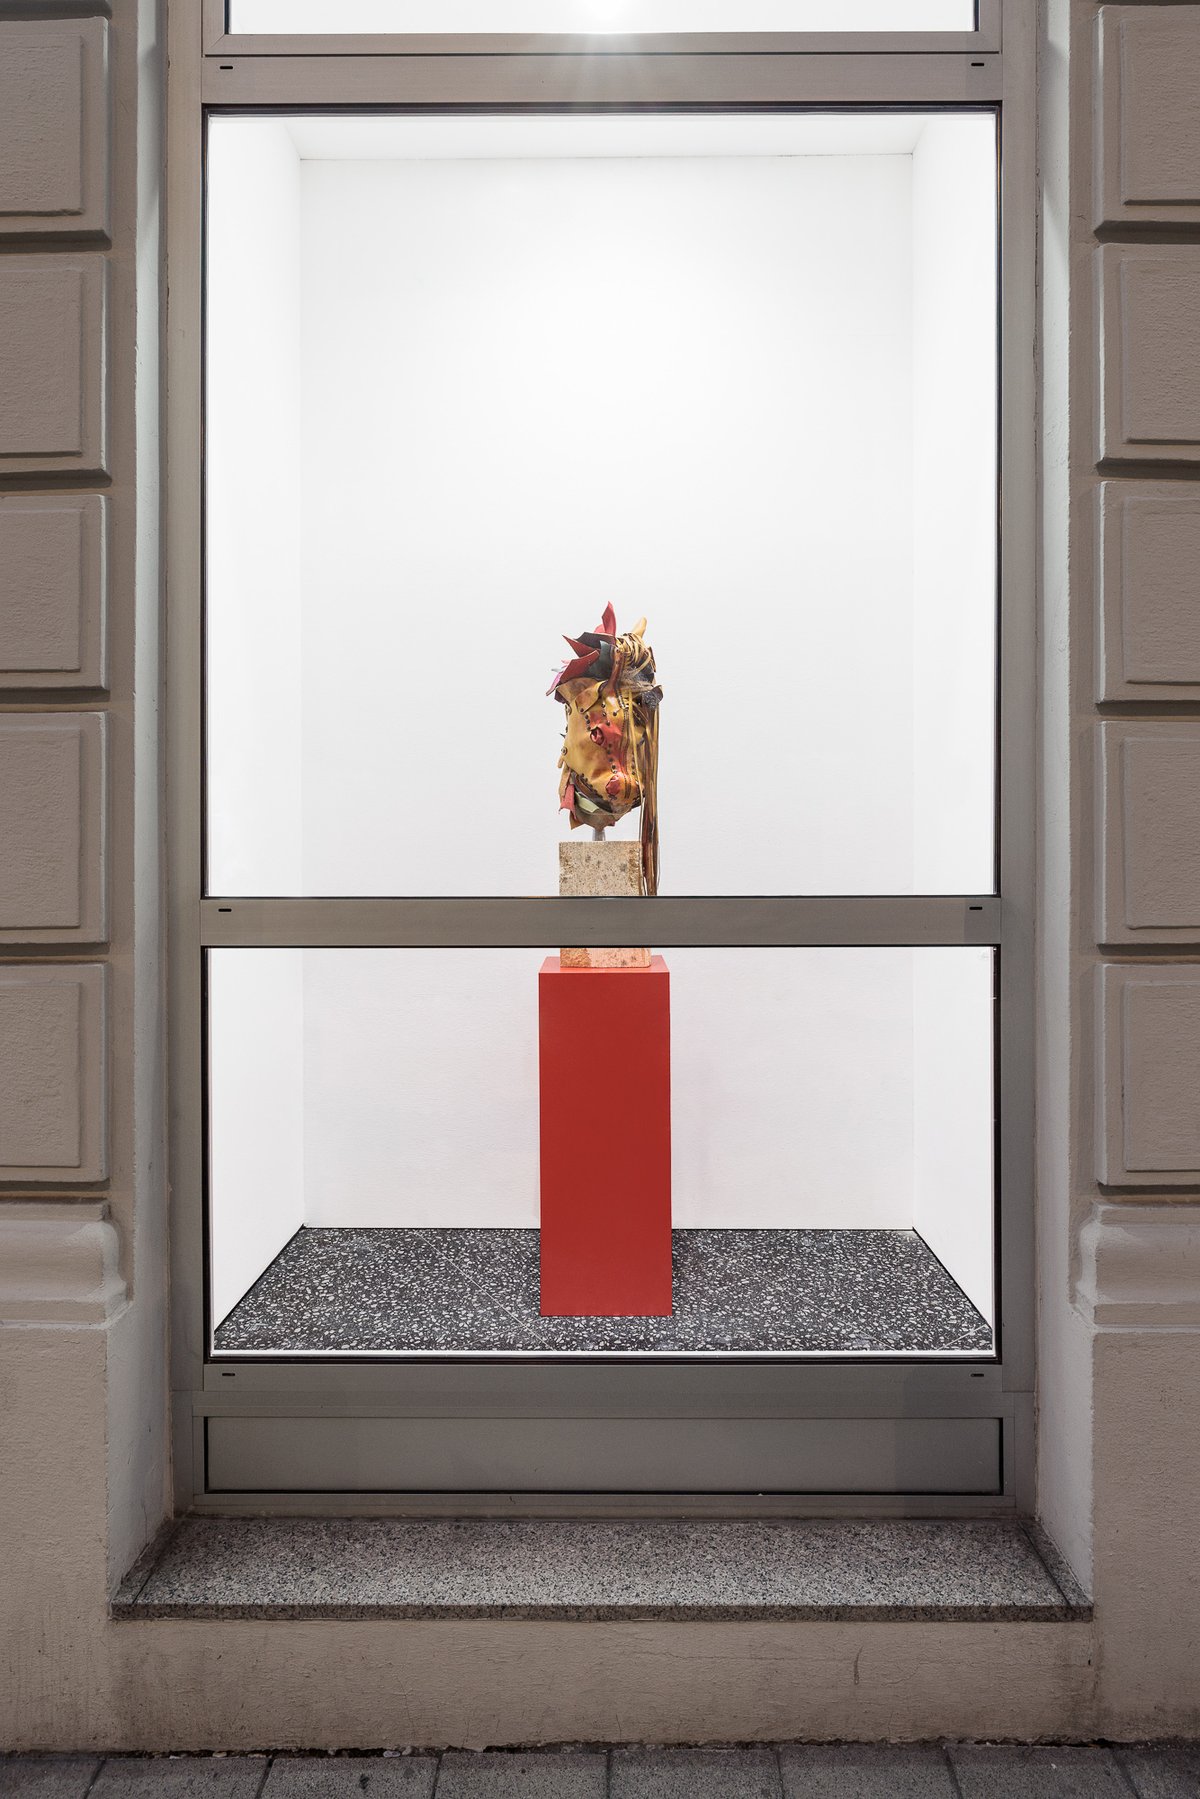 Lena HenkeMemory of a Young Sculpture X, 2024Soldered and boiled leather, pigment and steel mounted on Austrian granite, on wooden pedestal30 x 30 x 167 cm (installed dimensions) / 30 x 30 x 87 cm (dimensions without plinth)